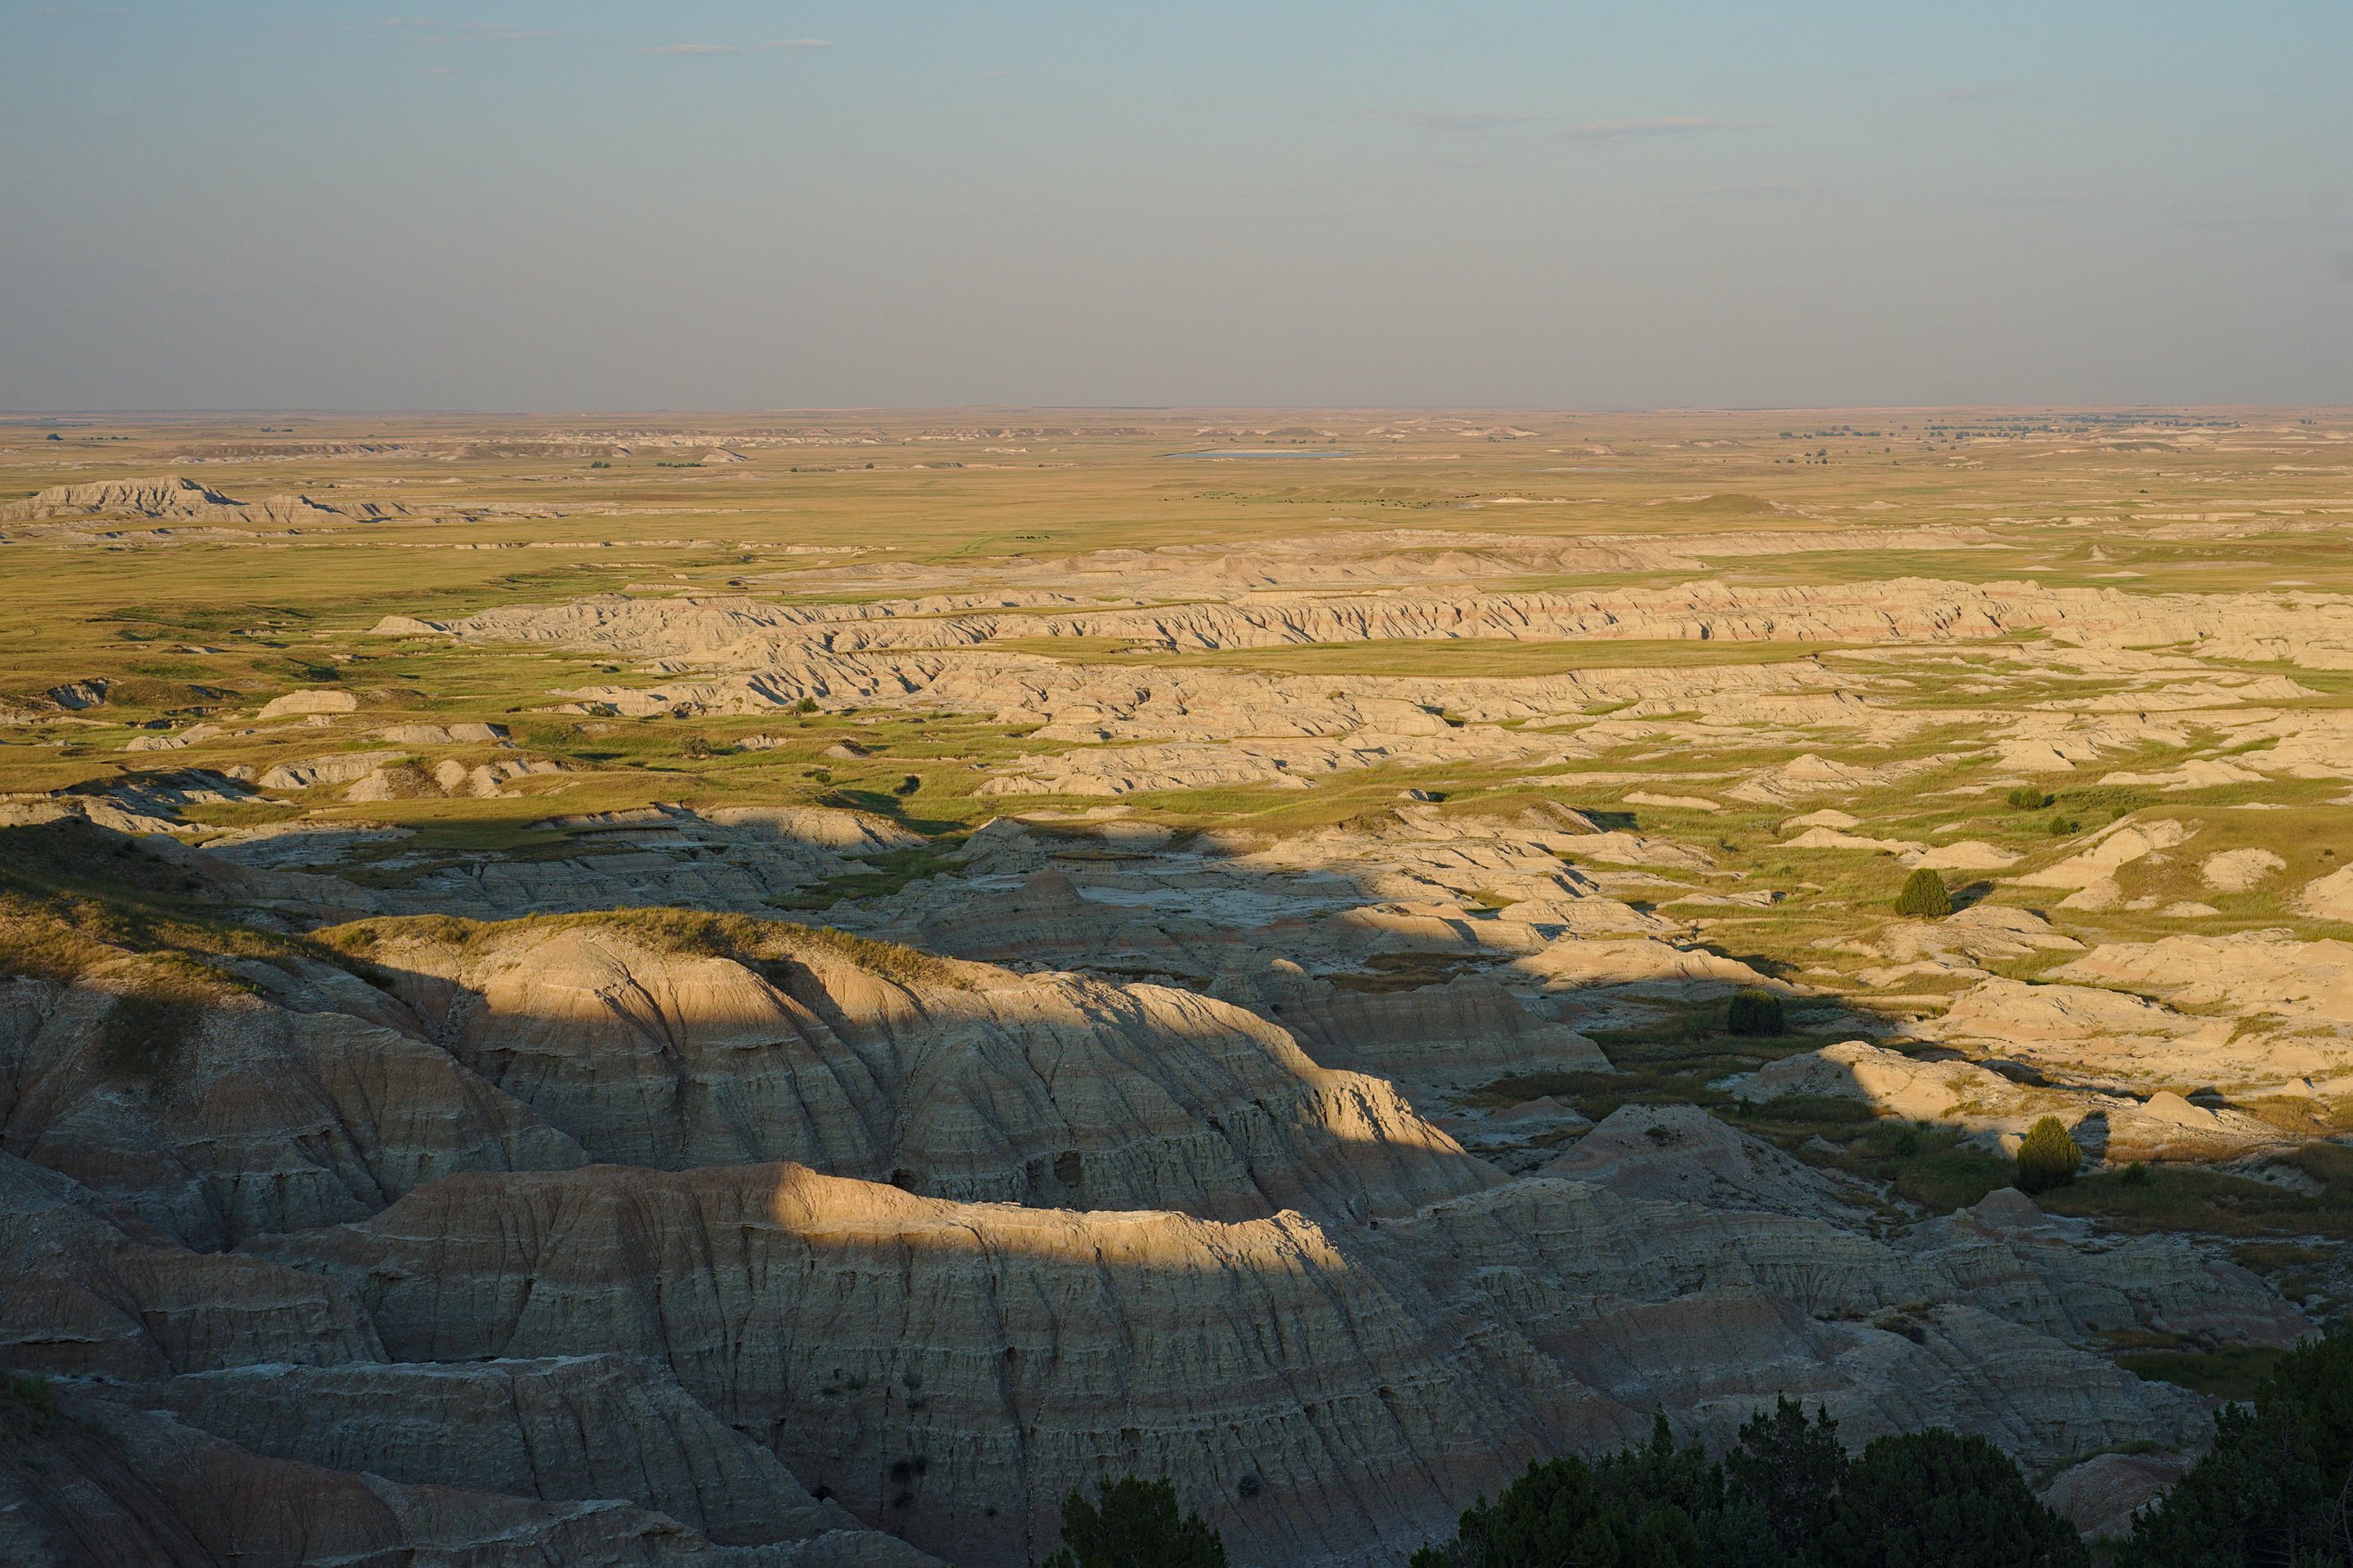 Sunset over the Badlands, SD photographed by luxagraf